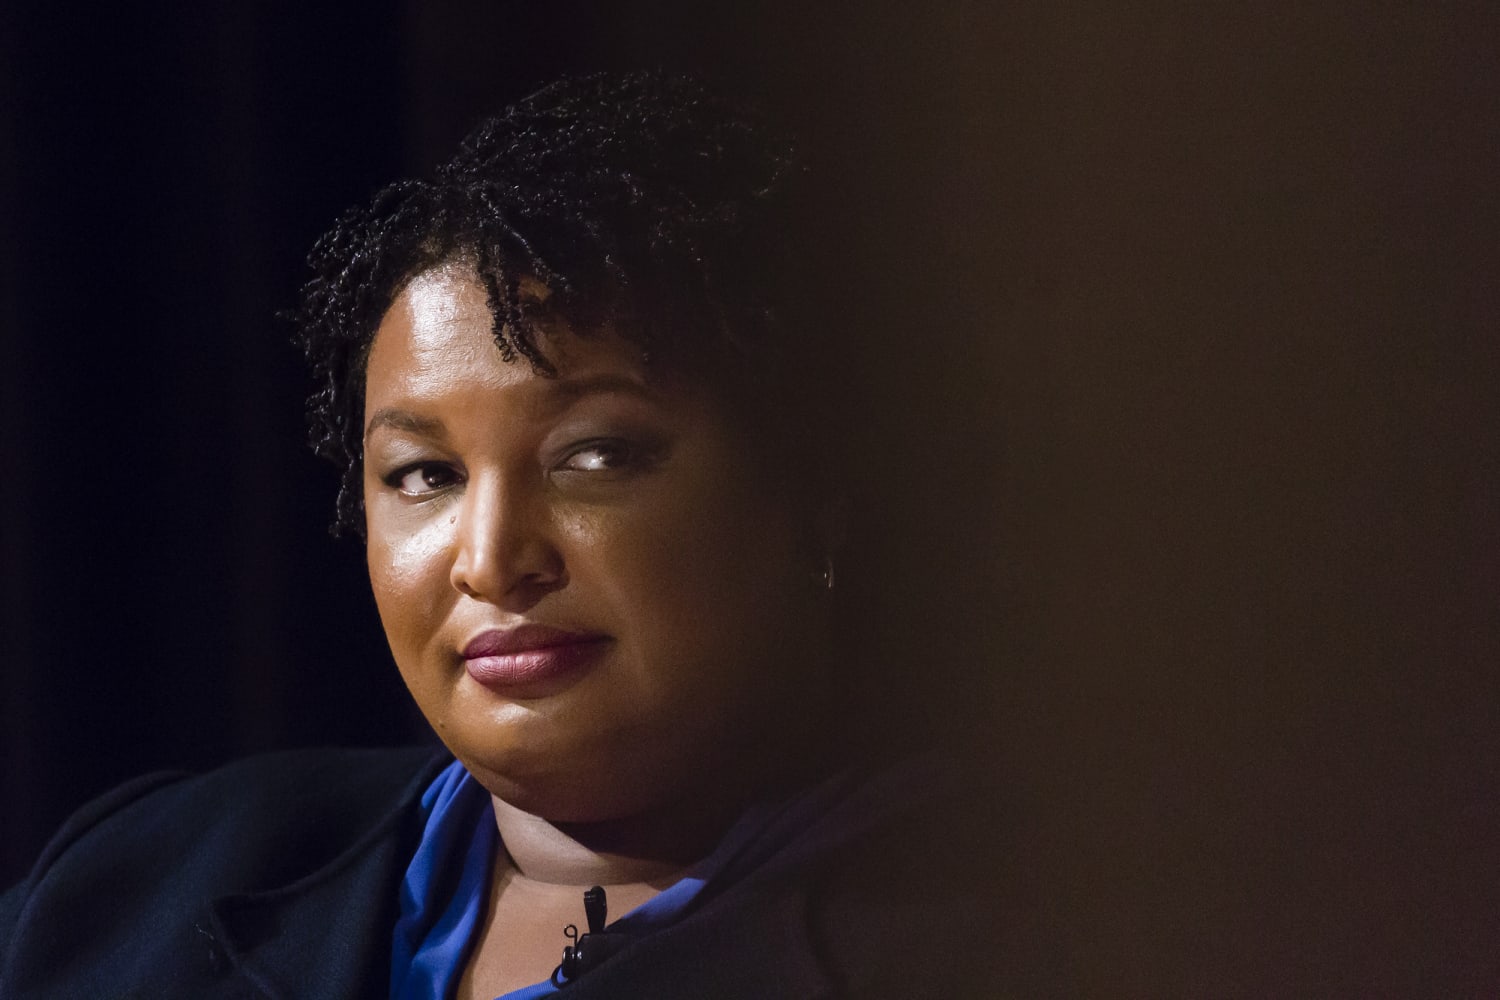 Stacey Abrams’ governor bid just did something inconceivable in Georgia